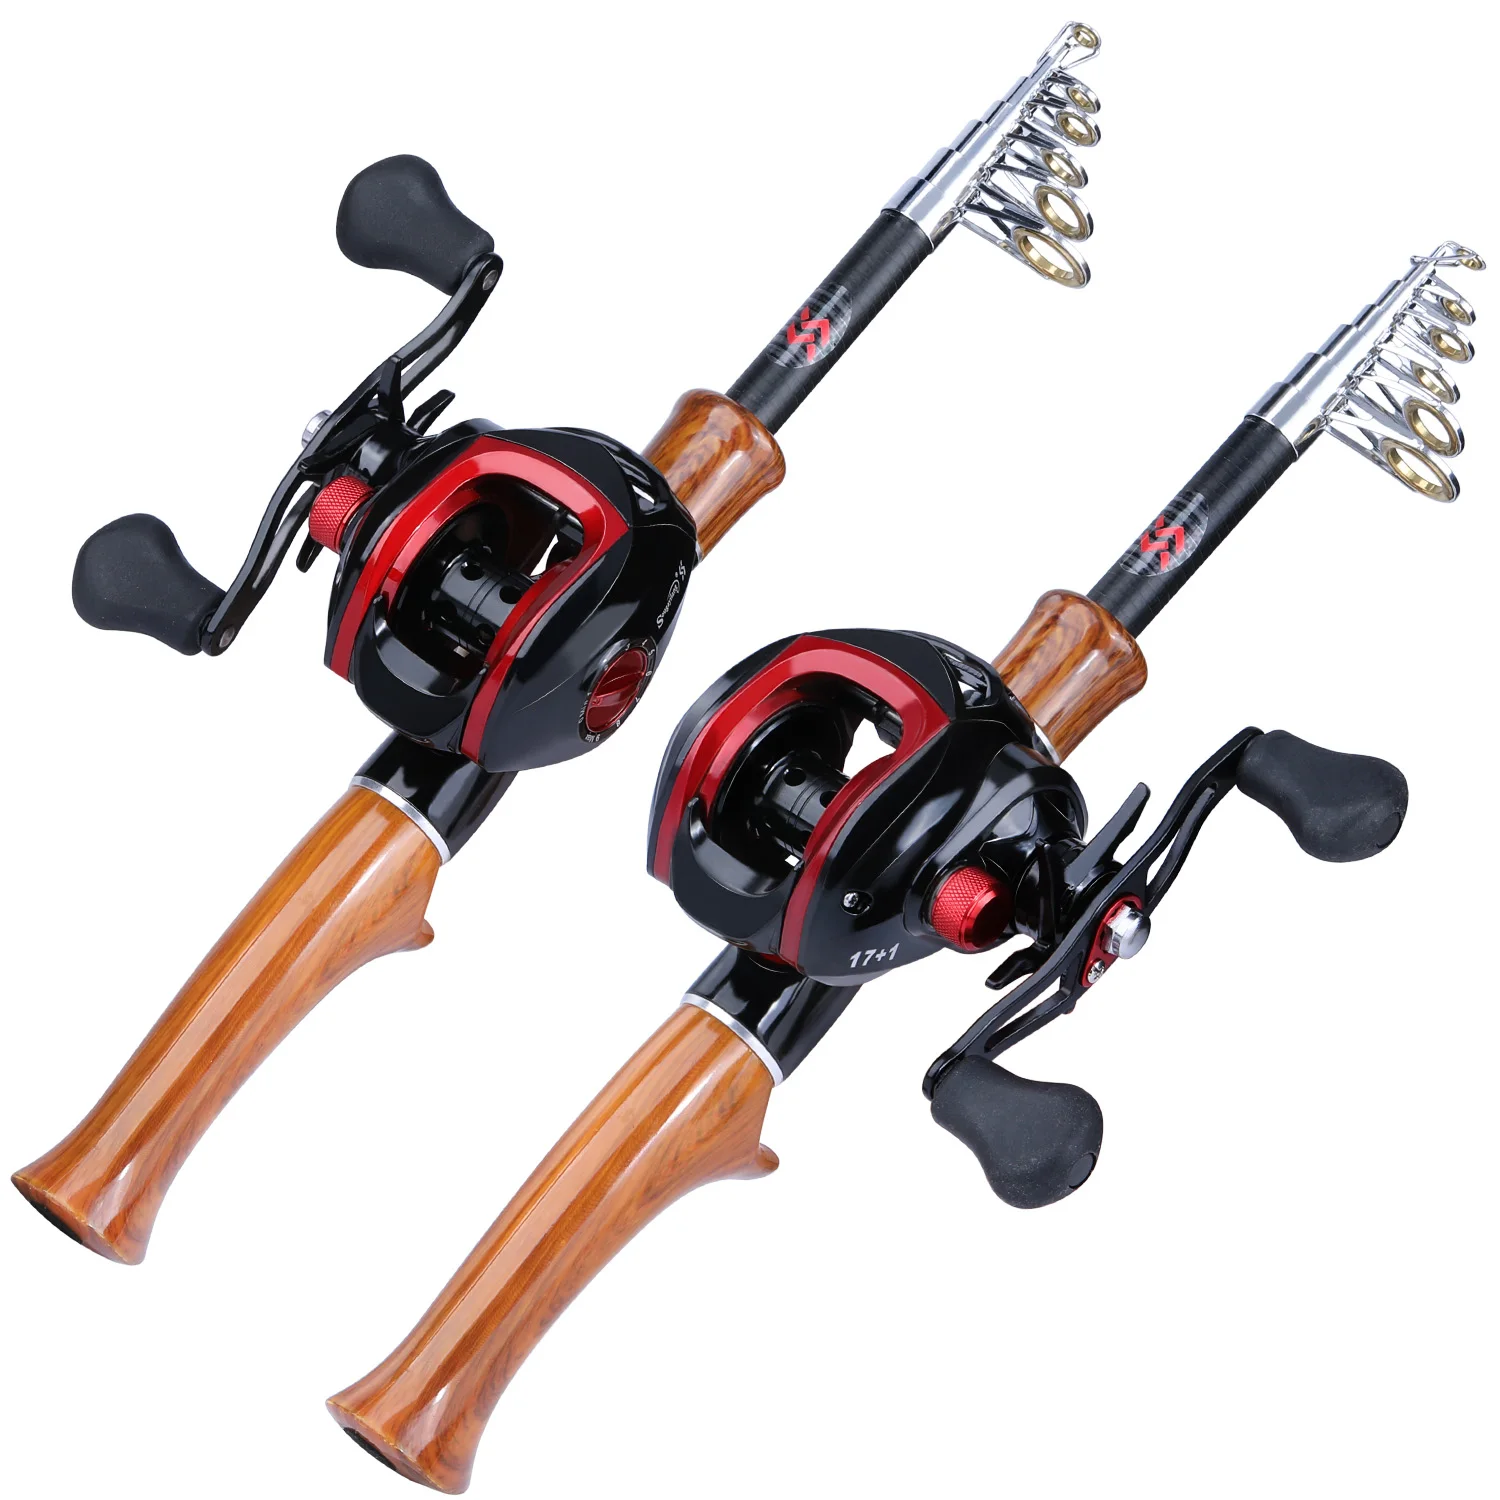 Details about   Sougayilang Casting 4 Section Carbon Fiber Fishing Rod and Black&Red 17+1  Reel 